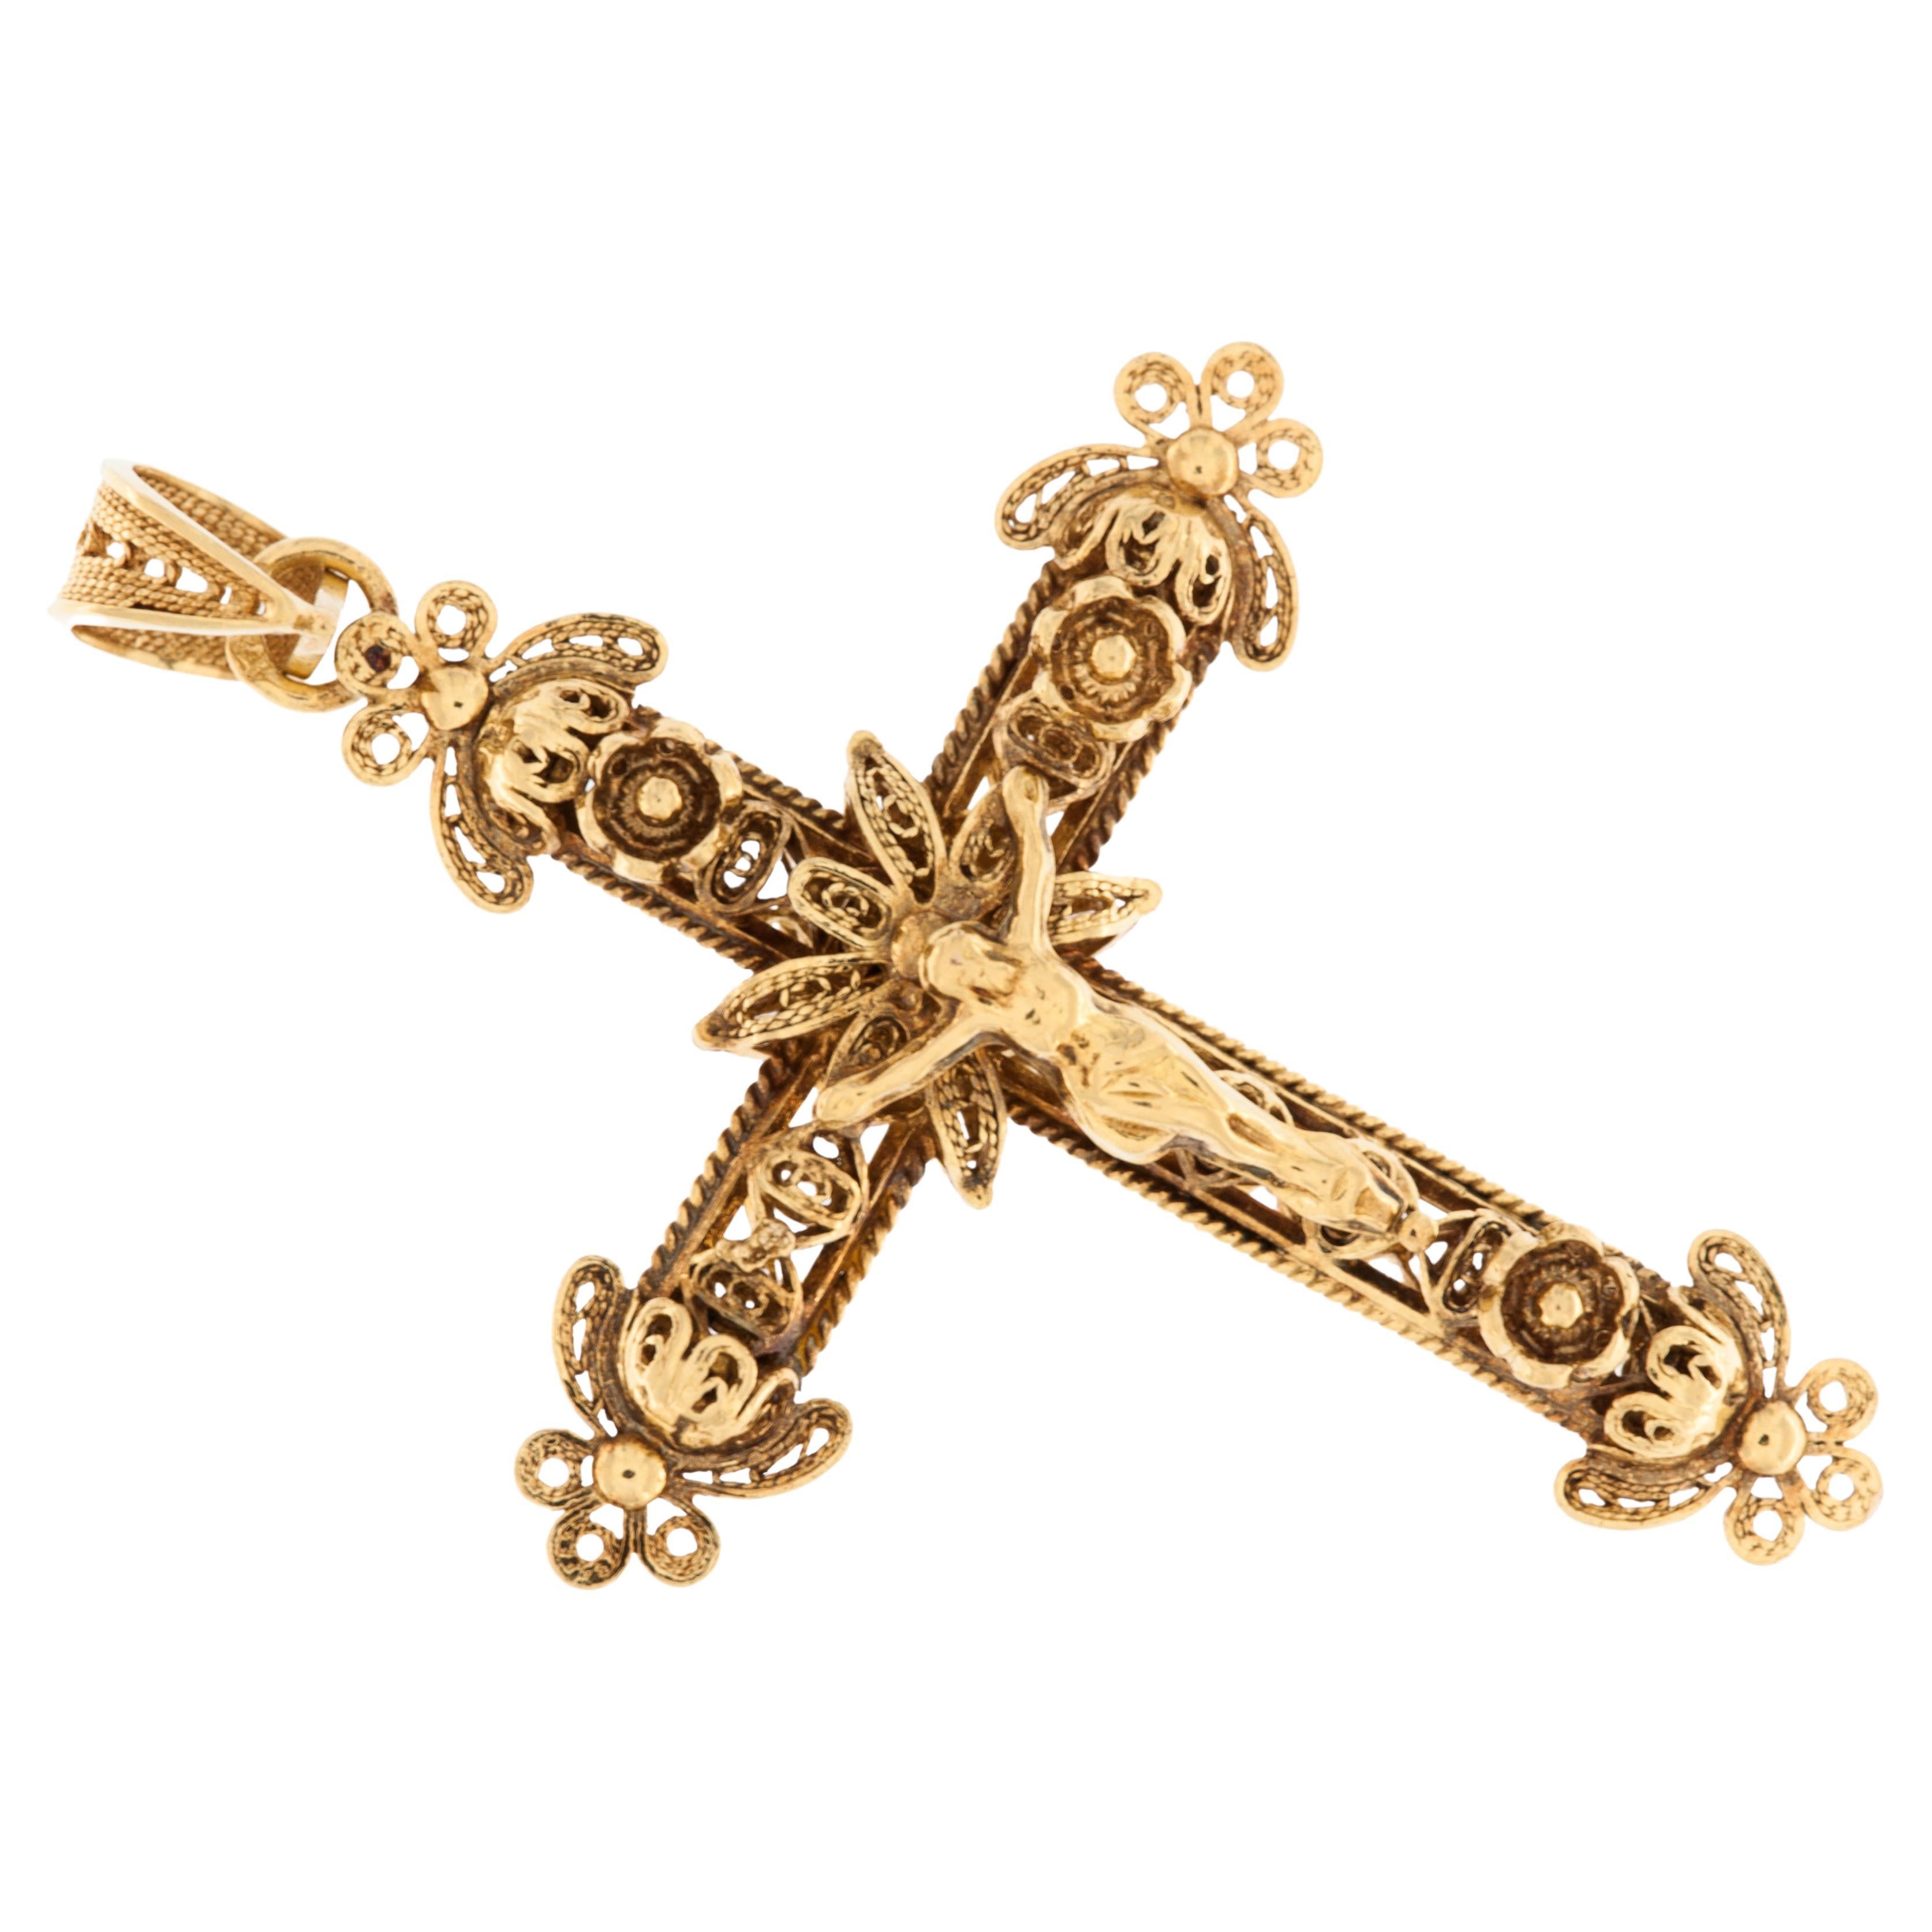 Hand-Chiselled 19kt Yellow Gold Portuguese Crucifix